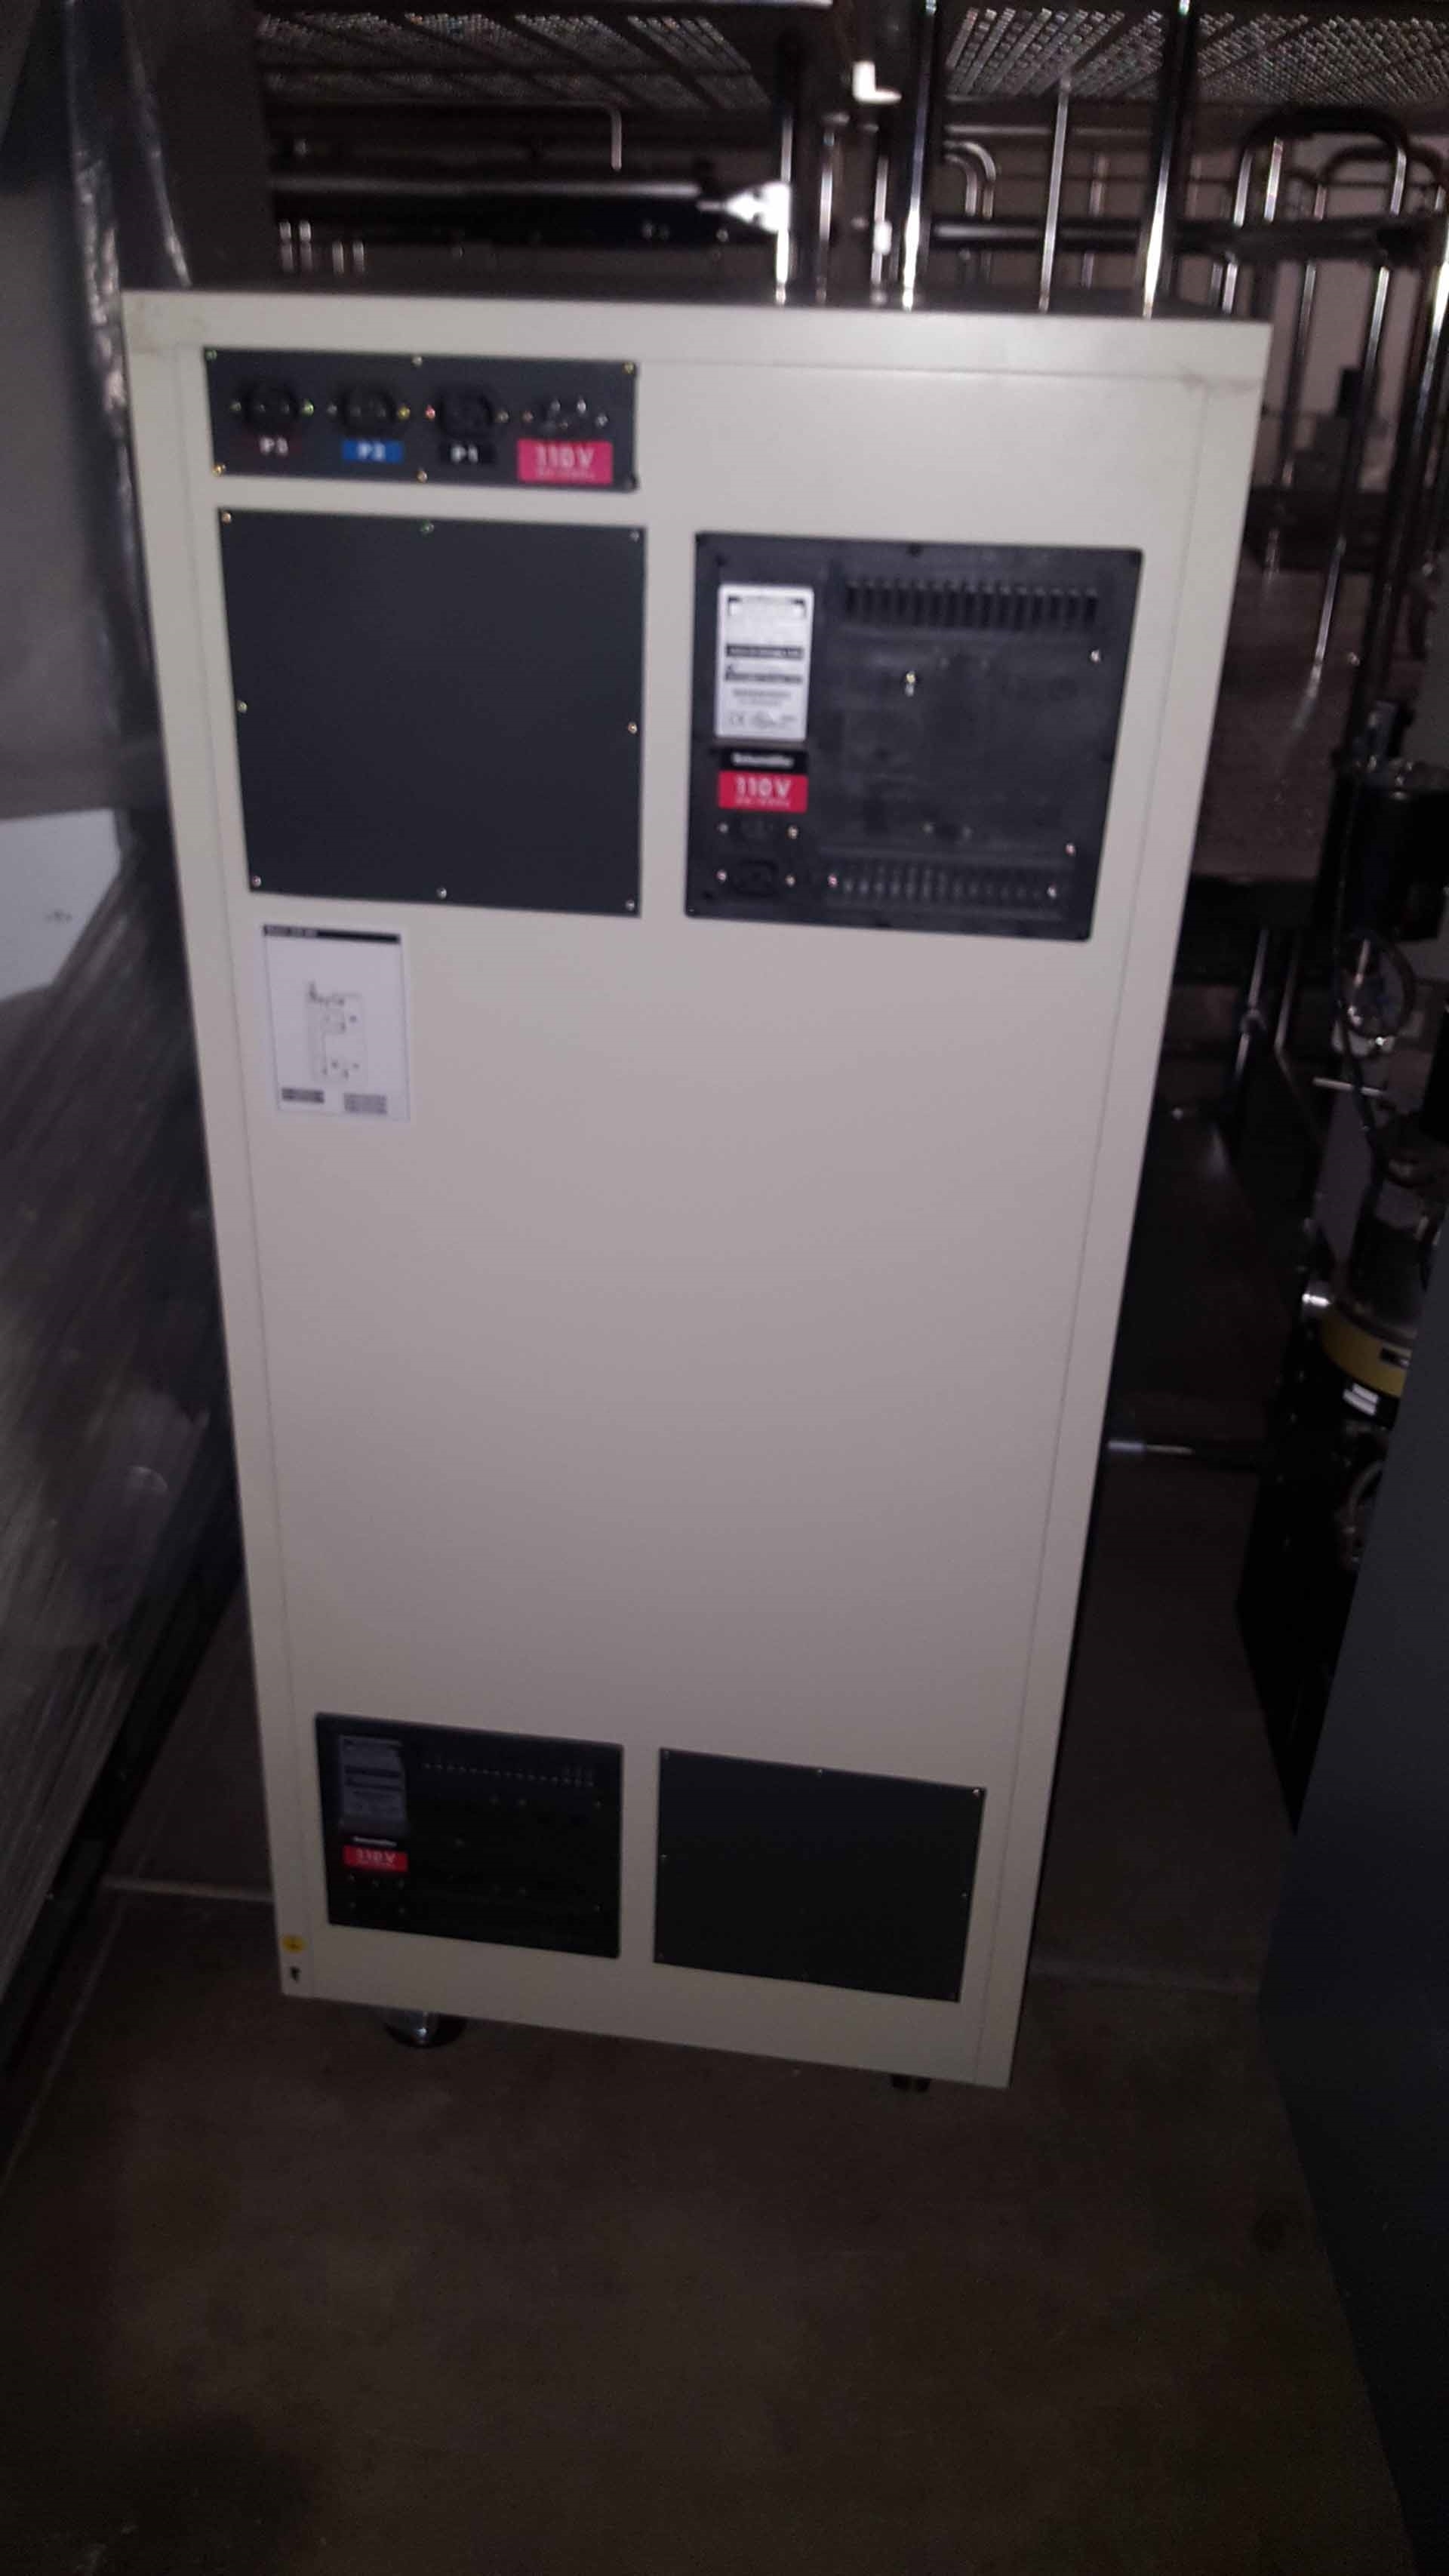 Photo Used DR. STORAGE X2E 480 For Sale